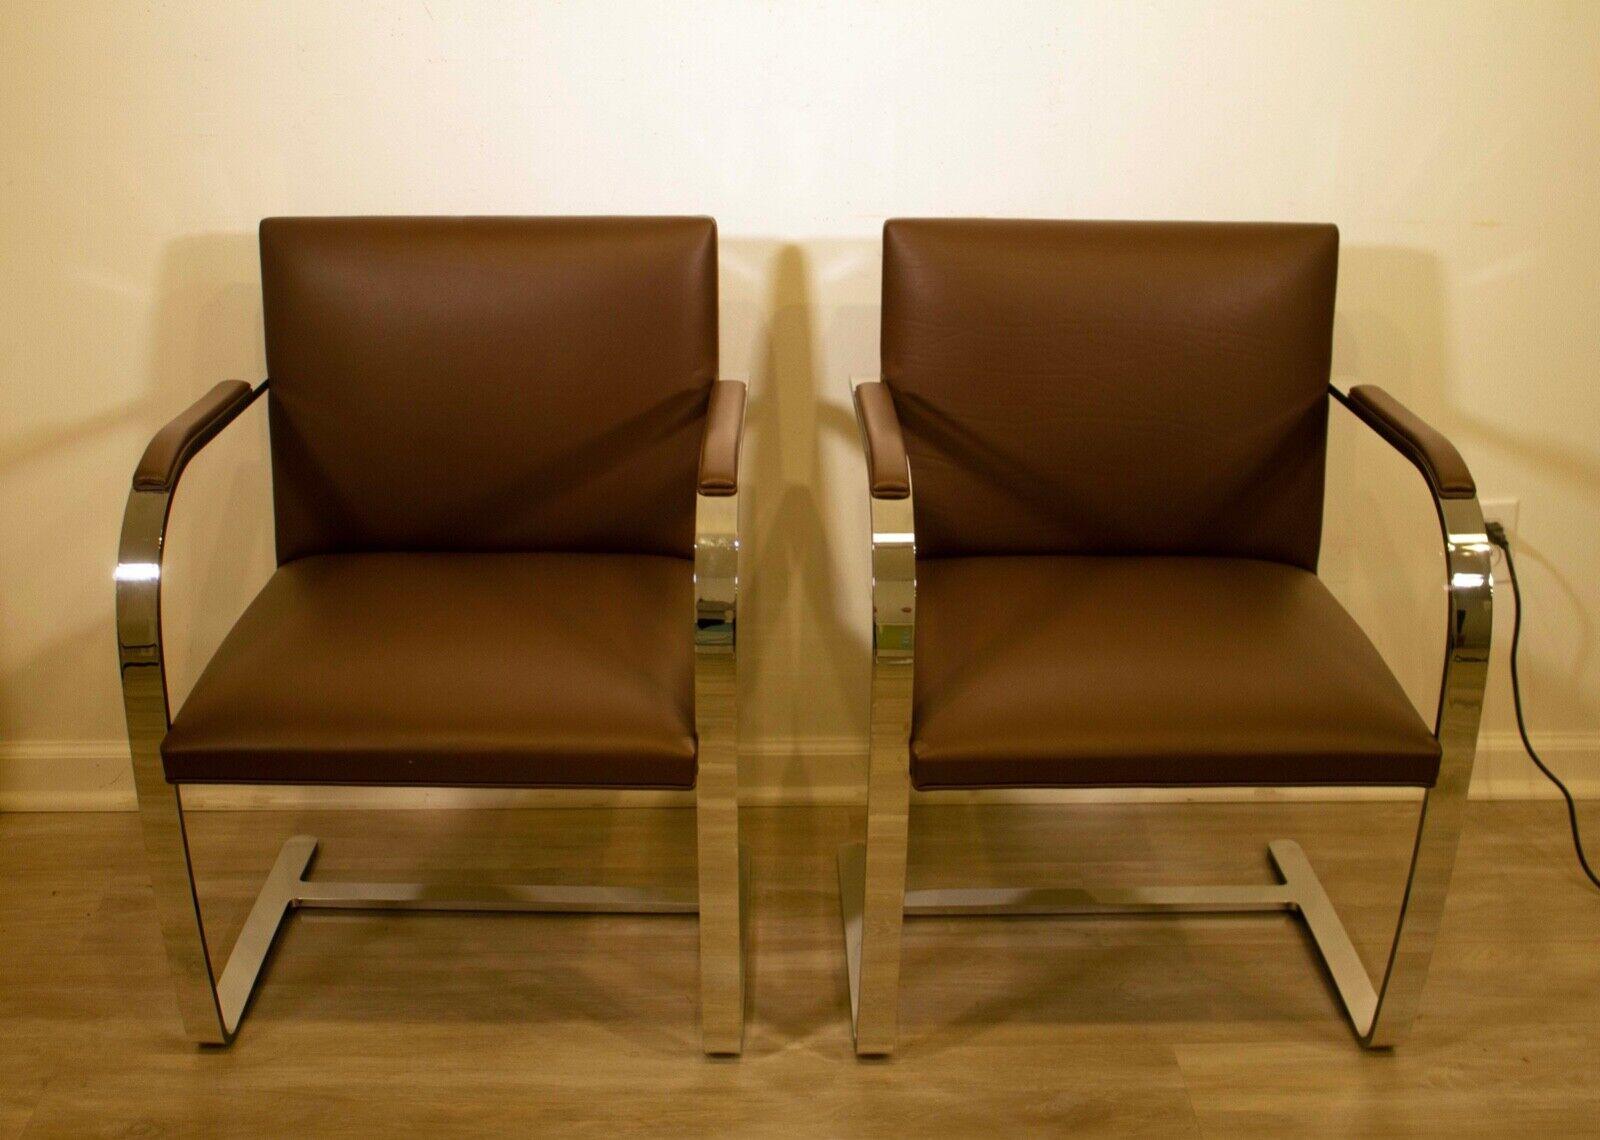 The Brno Chair is a timeless design by Ludwig Mies van der Rohe that has been praised for its simplicity, elegance, and comfort. This contemporary iteration of the chair features a chrome-plated steel frame and brown leather upholstery. The arm pads